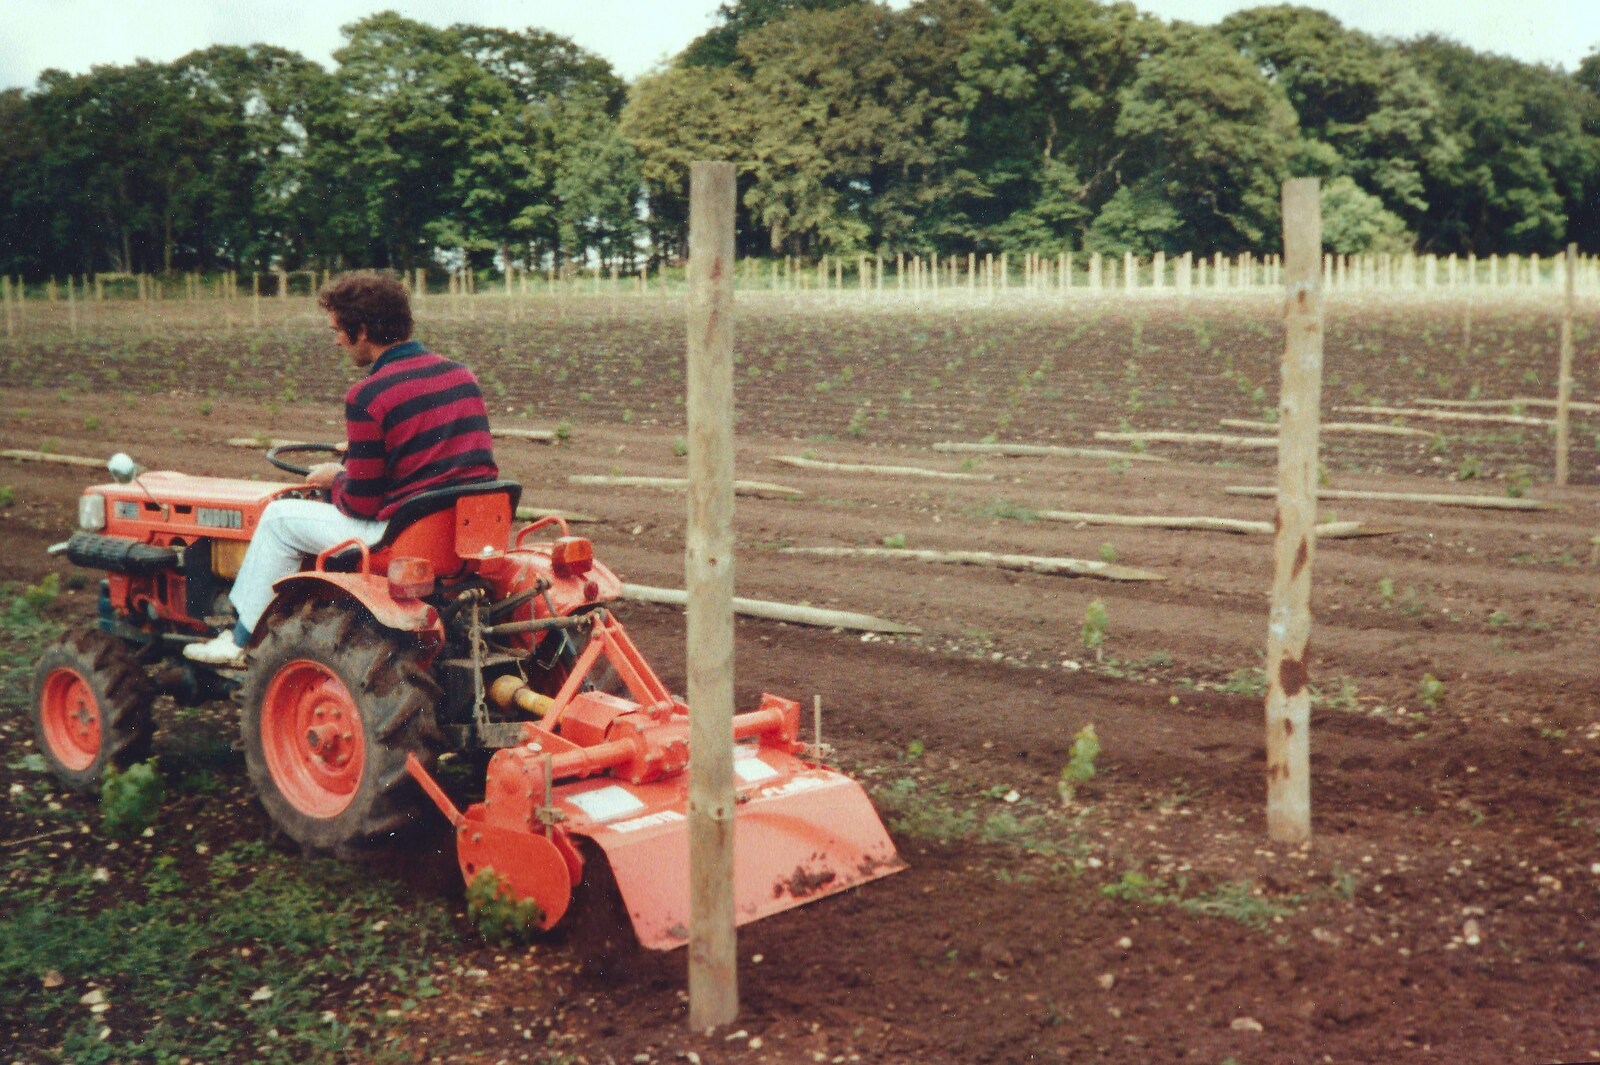 Mike weeds the rows with a small tractor from Constructing a Vineyard, Harrow Road, Bransgore, Dorset - 1st September 1981